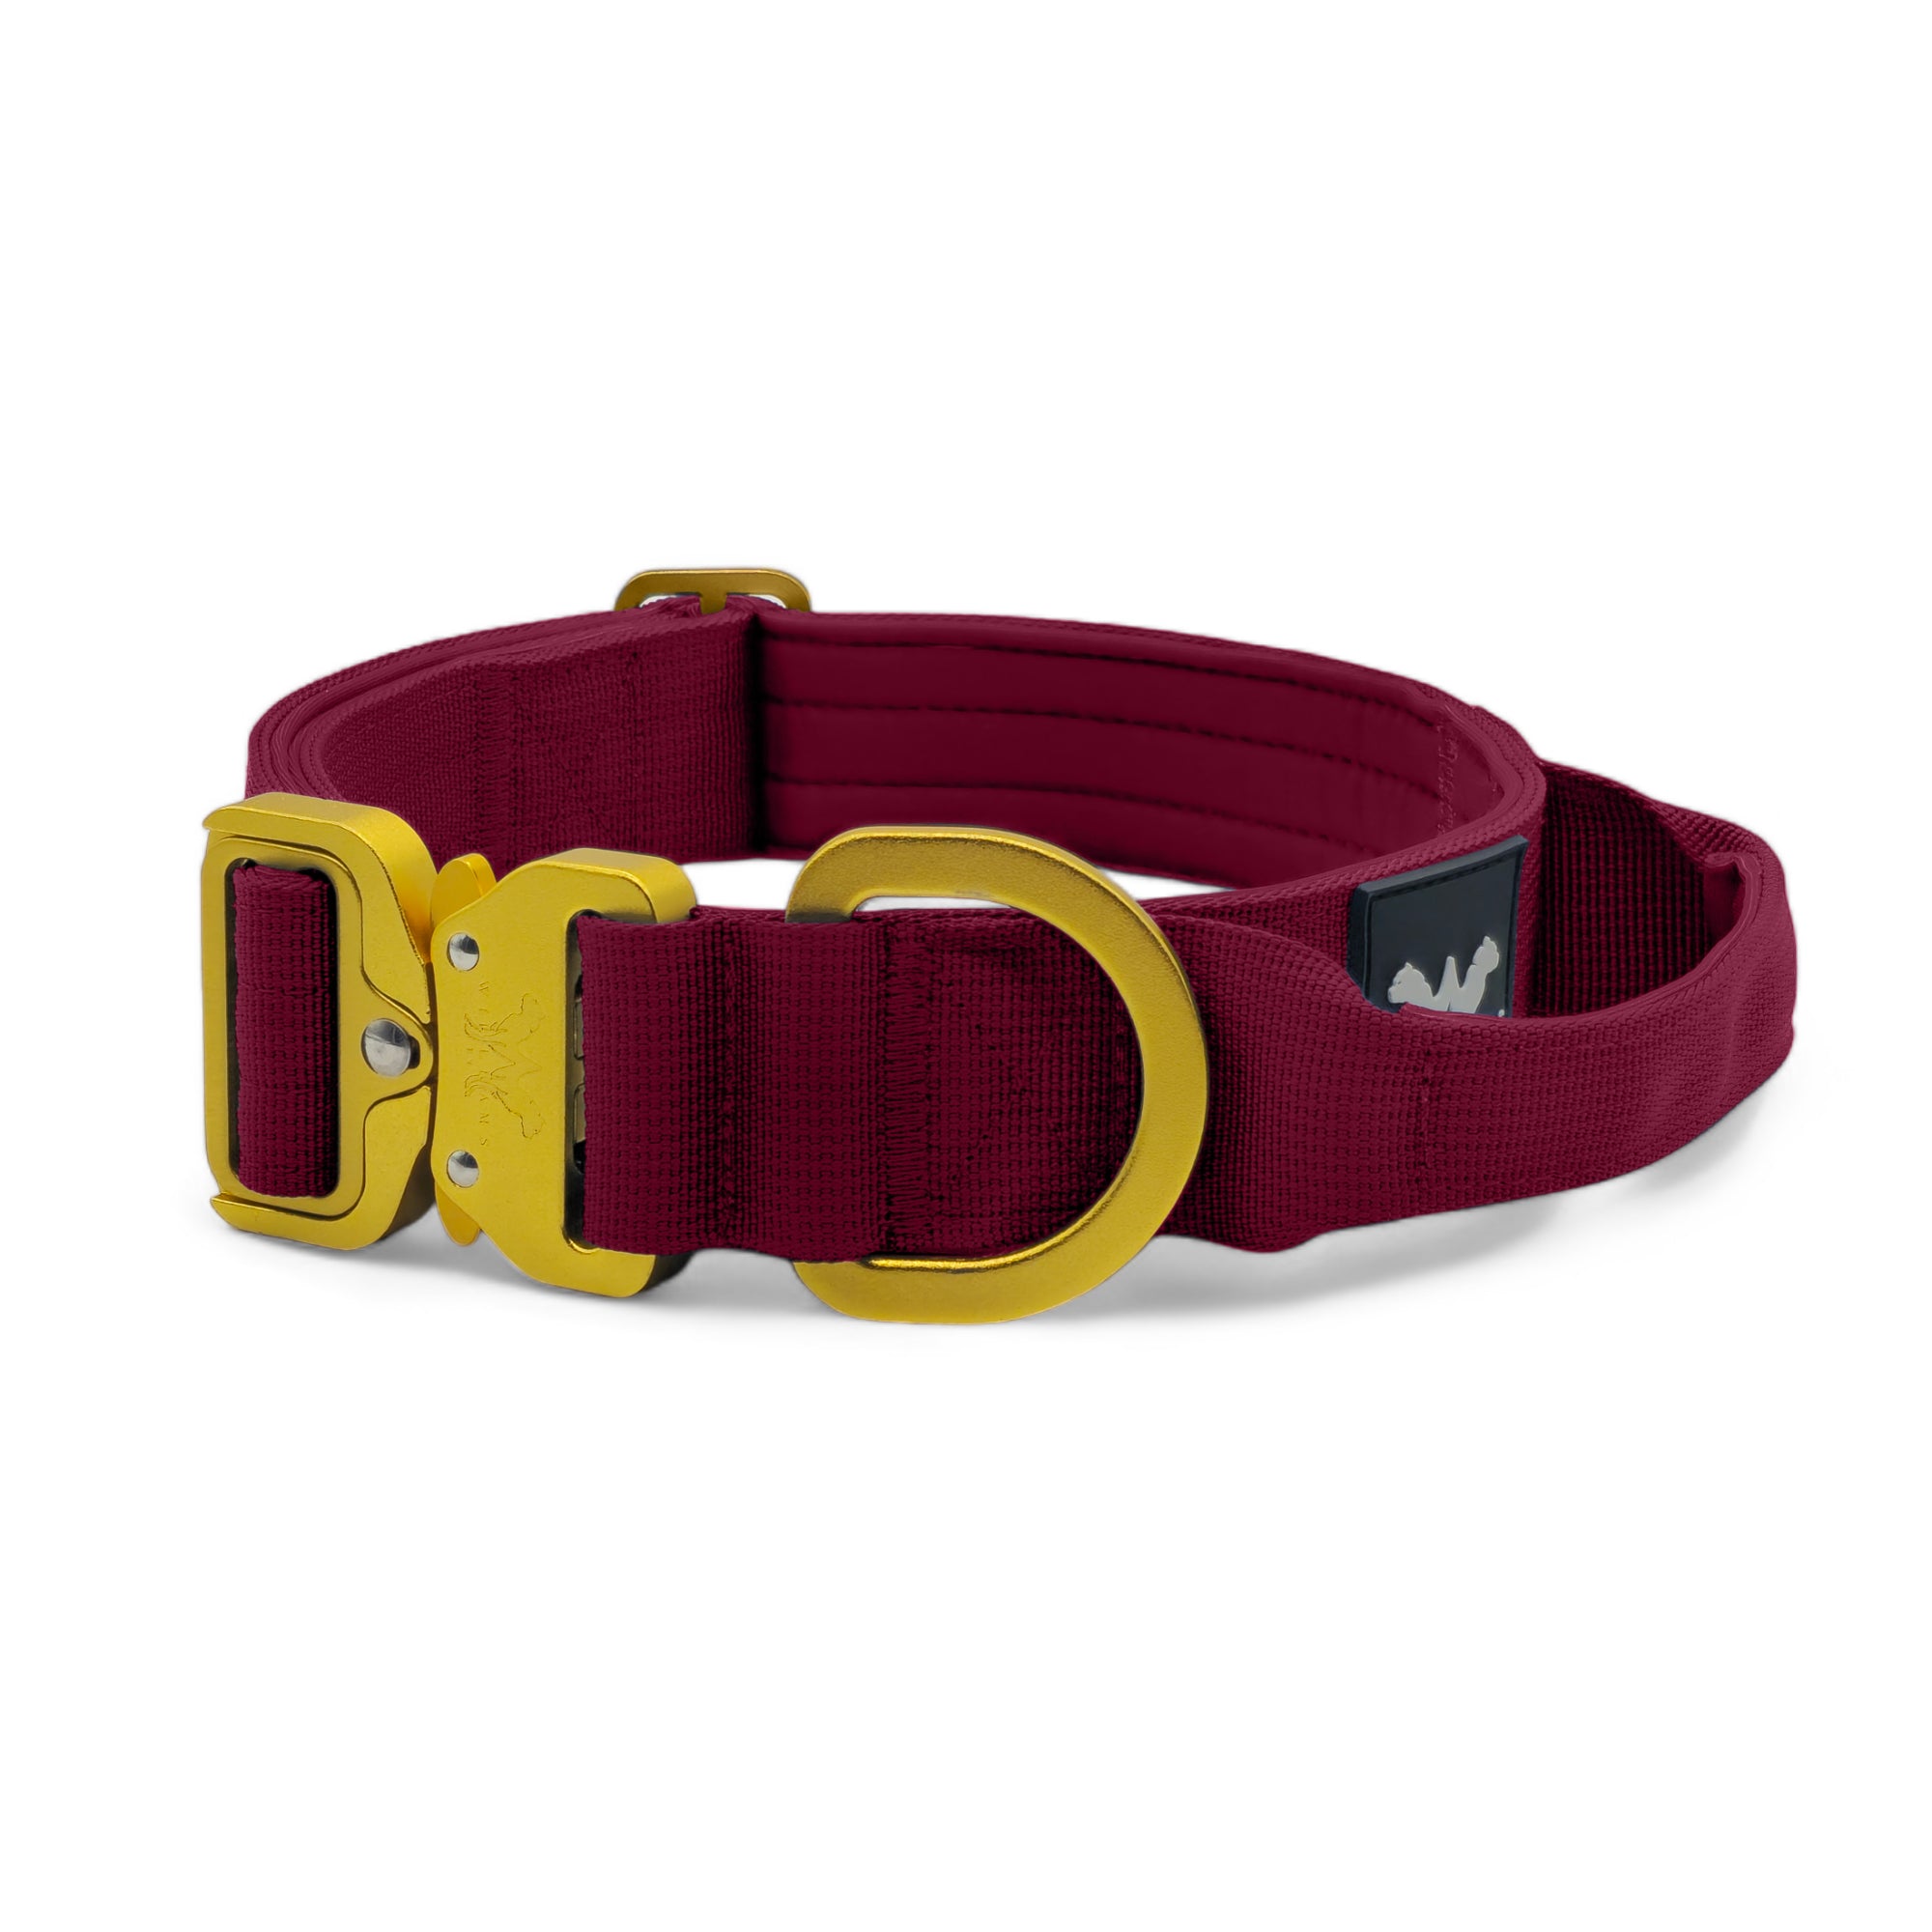 Light Tactical Collar 4CM Cherry Red | Quad Stitched Nylon Lightweight Gold Aluminium Buckle + D Ring Adjustable Collar With Handle